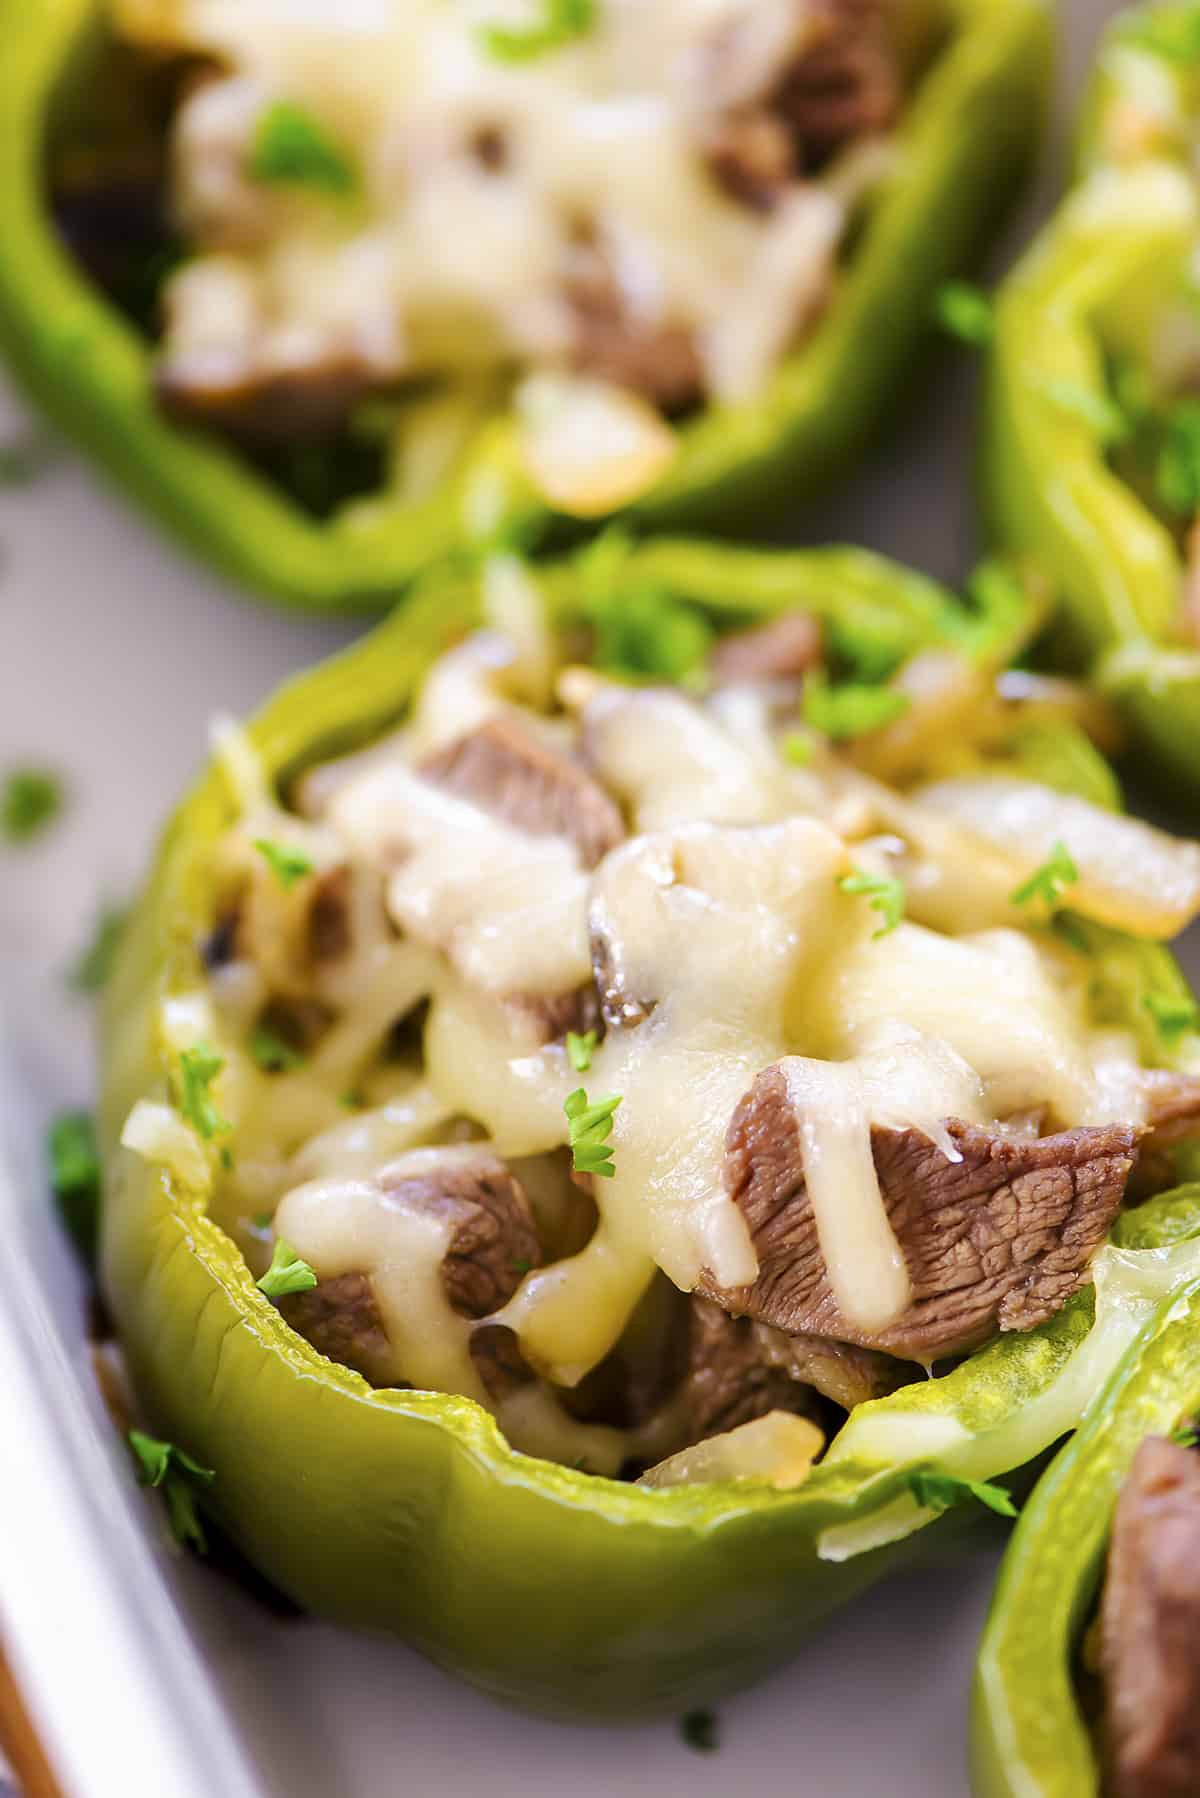 Philly cheesesteak stuffed pepper in white baking dish.